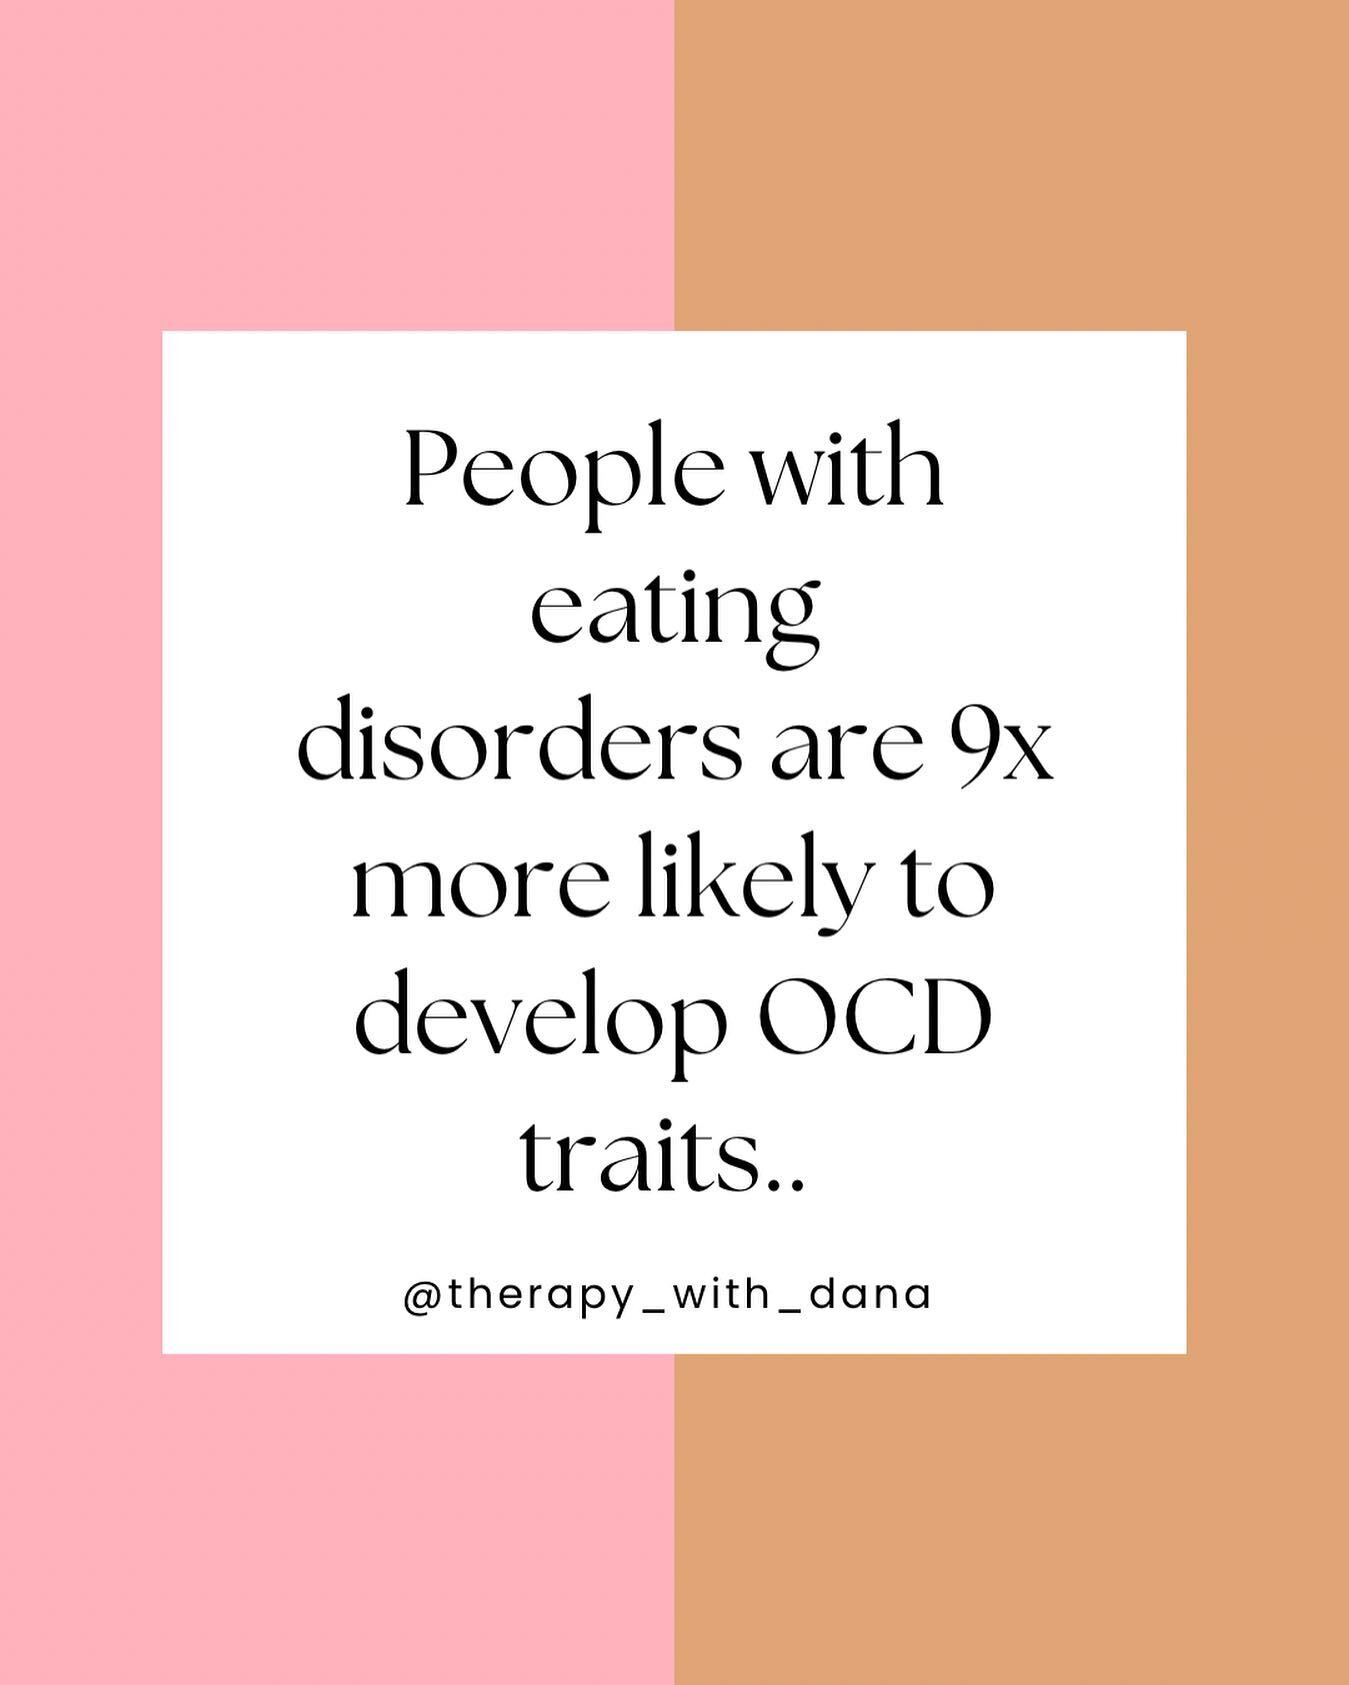 Eating disorders and OCD have a common theme; they both are used to cope with individuals emotions in a ritualistic manner. The more the person engages in the ritual, the stronger the disorders become. 

For ED's the more the person engages in utiliz